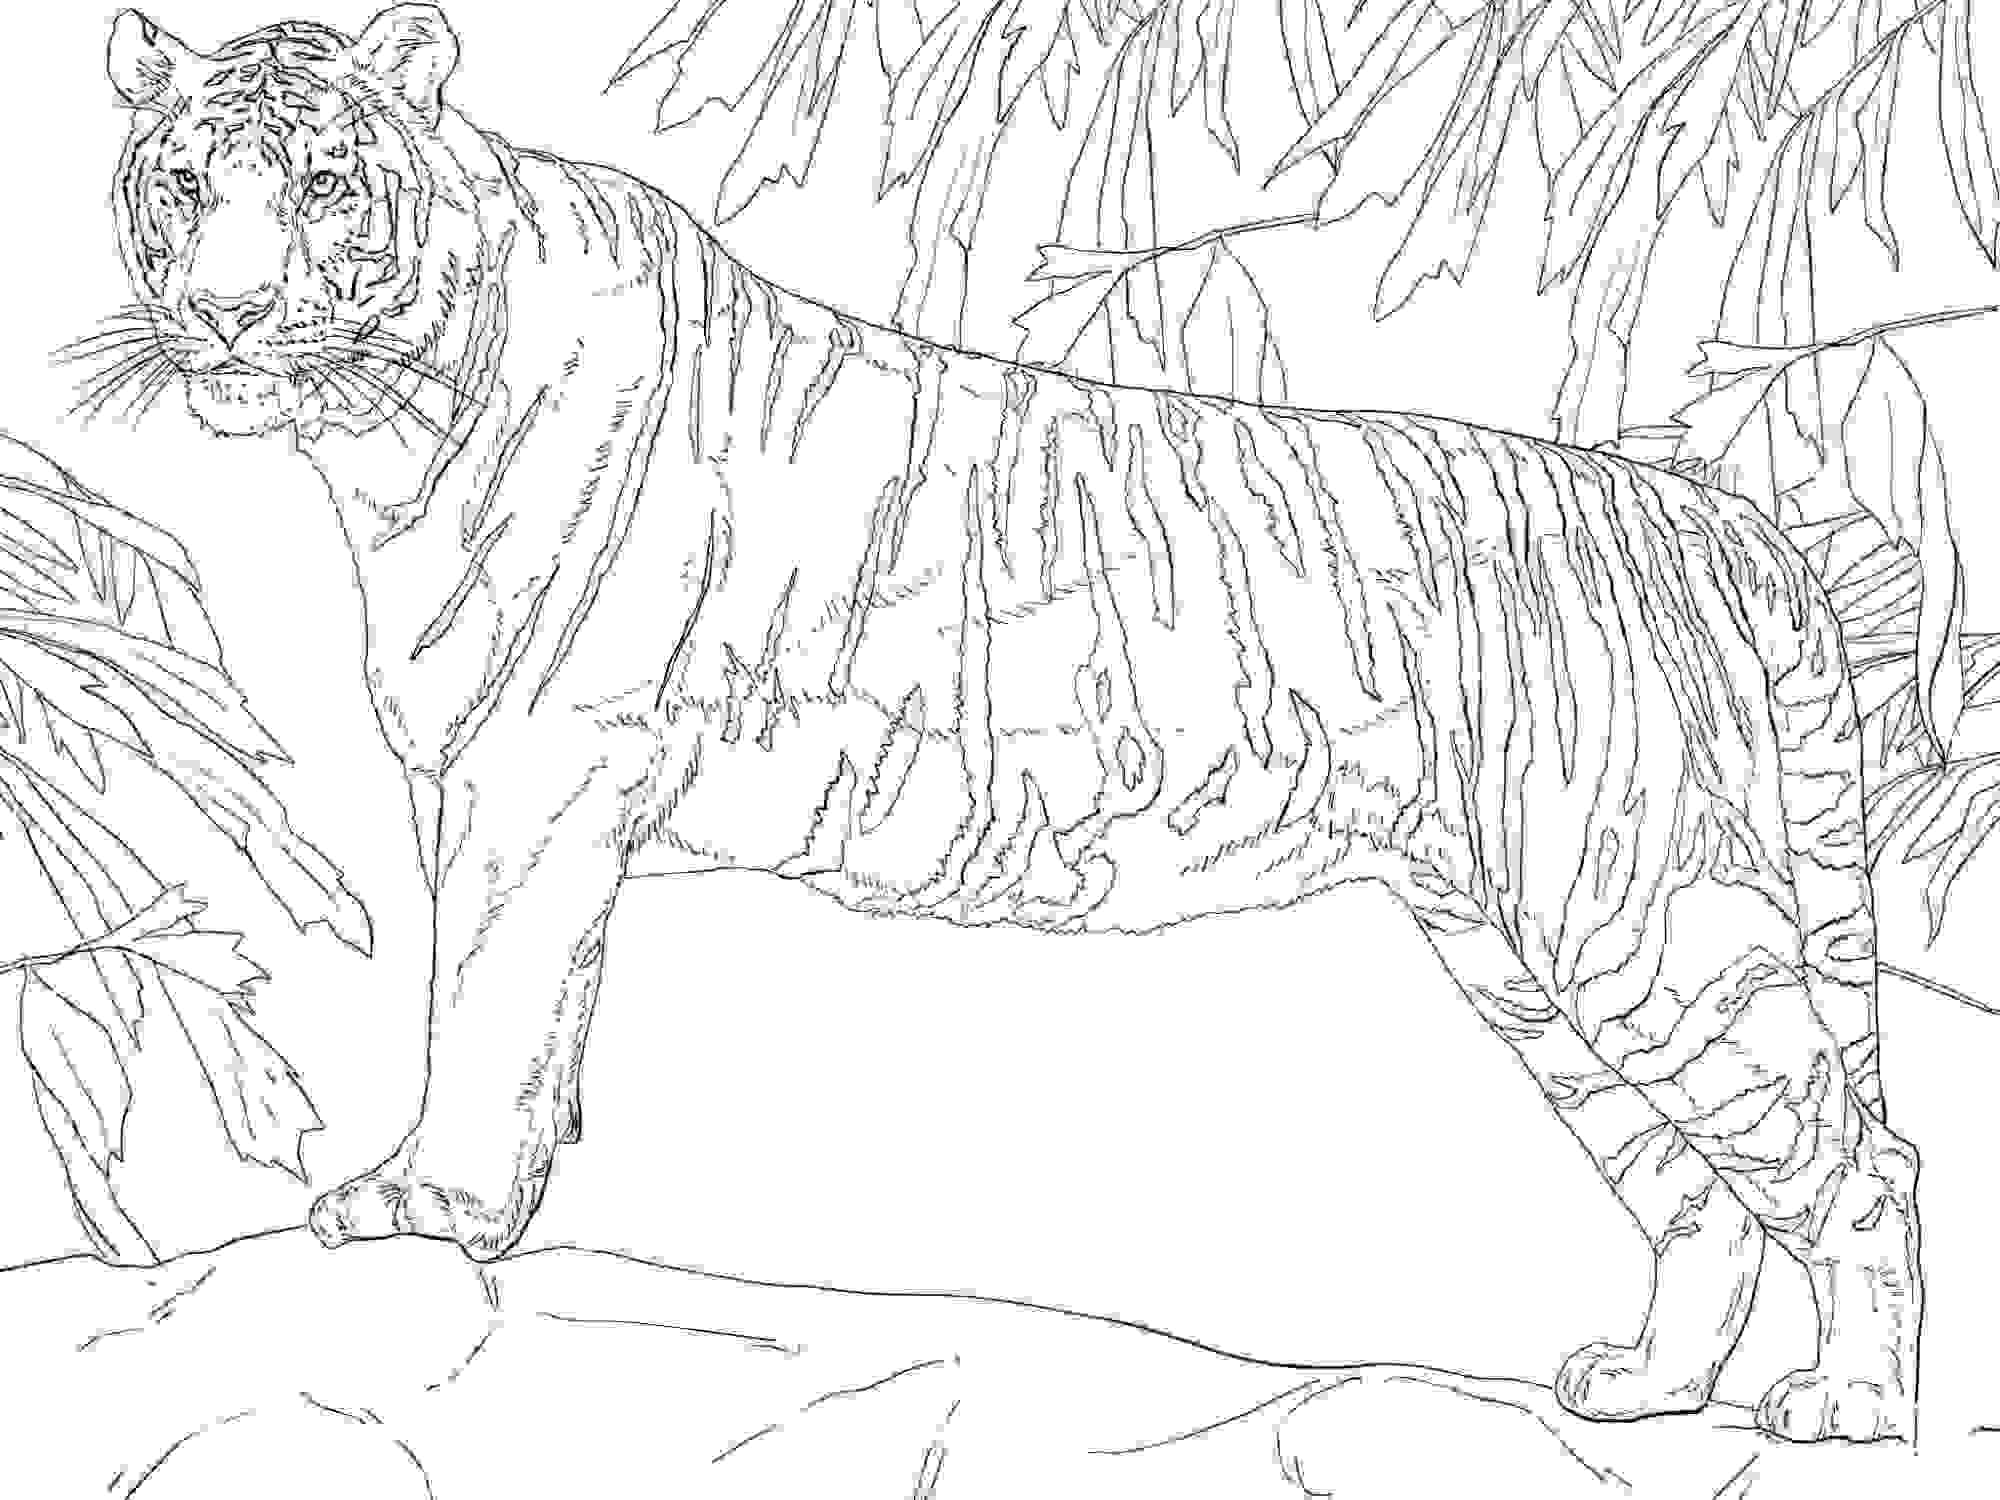 Standing Bengal tiger on the mountain Coloring Page